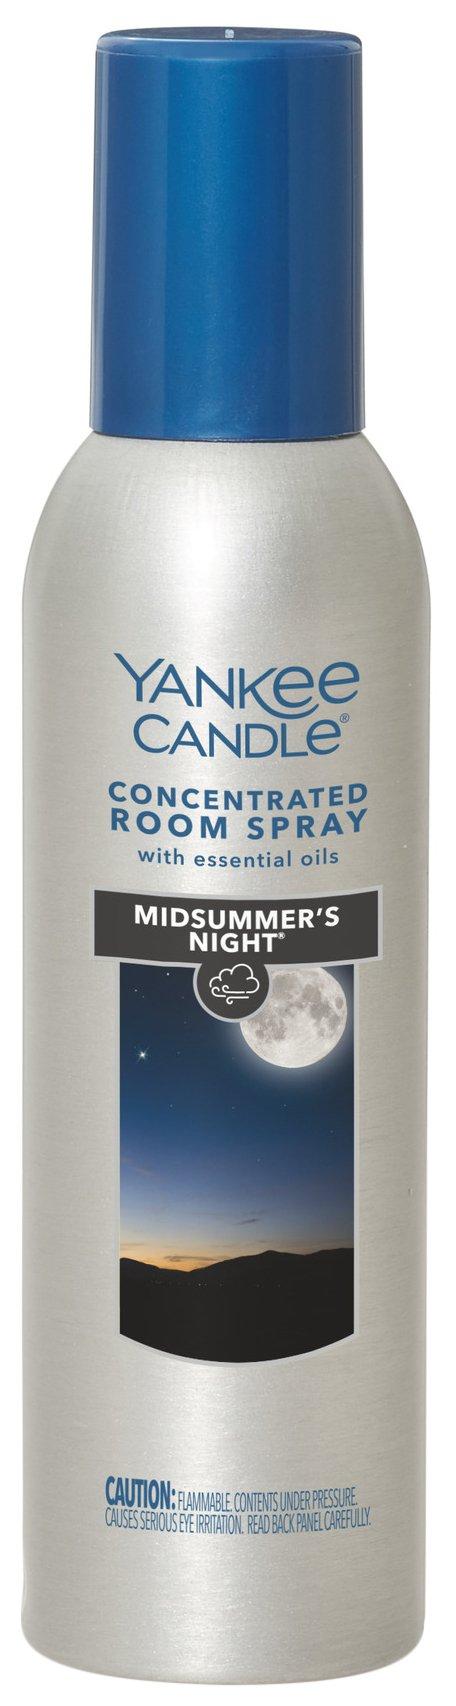 Yankee Candle Midsummer's Night Concentrated Room Spray